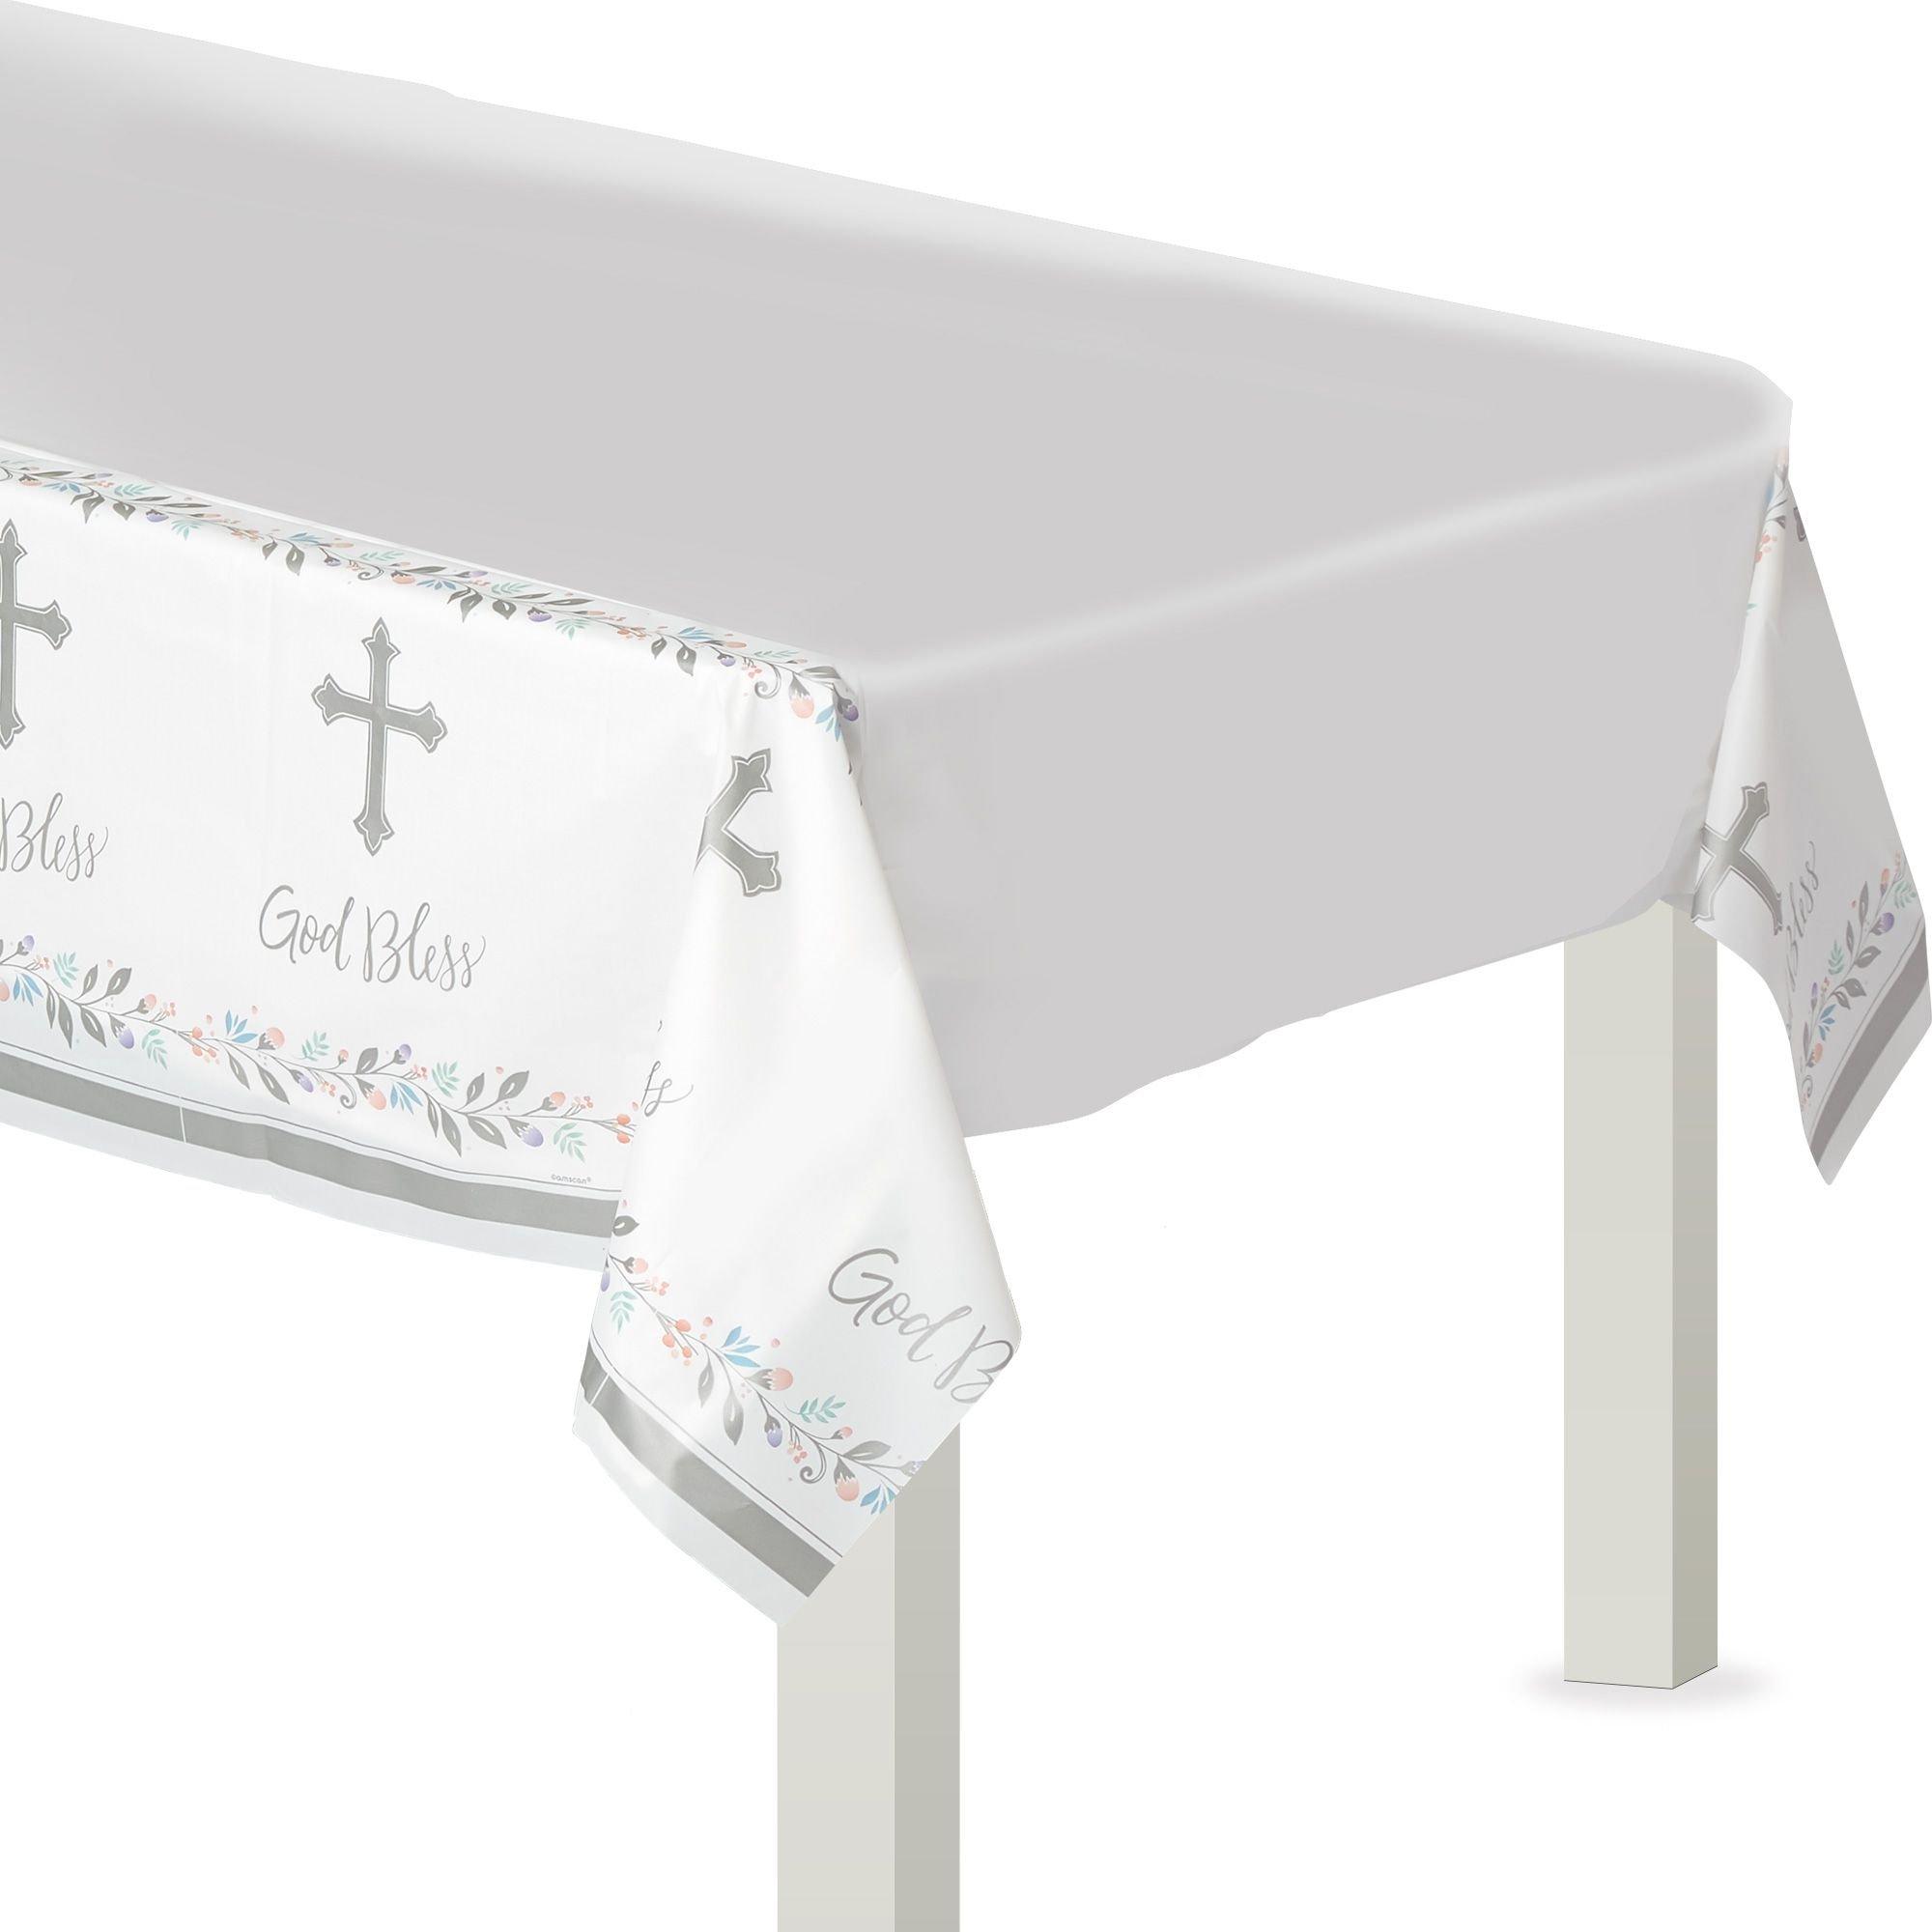 God Bless Holy Day Plastic Table Cover